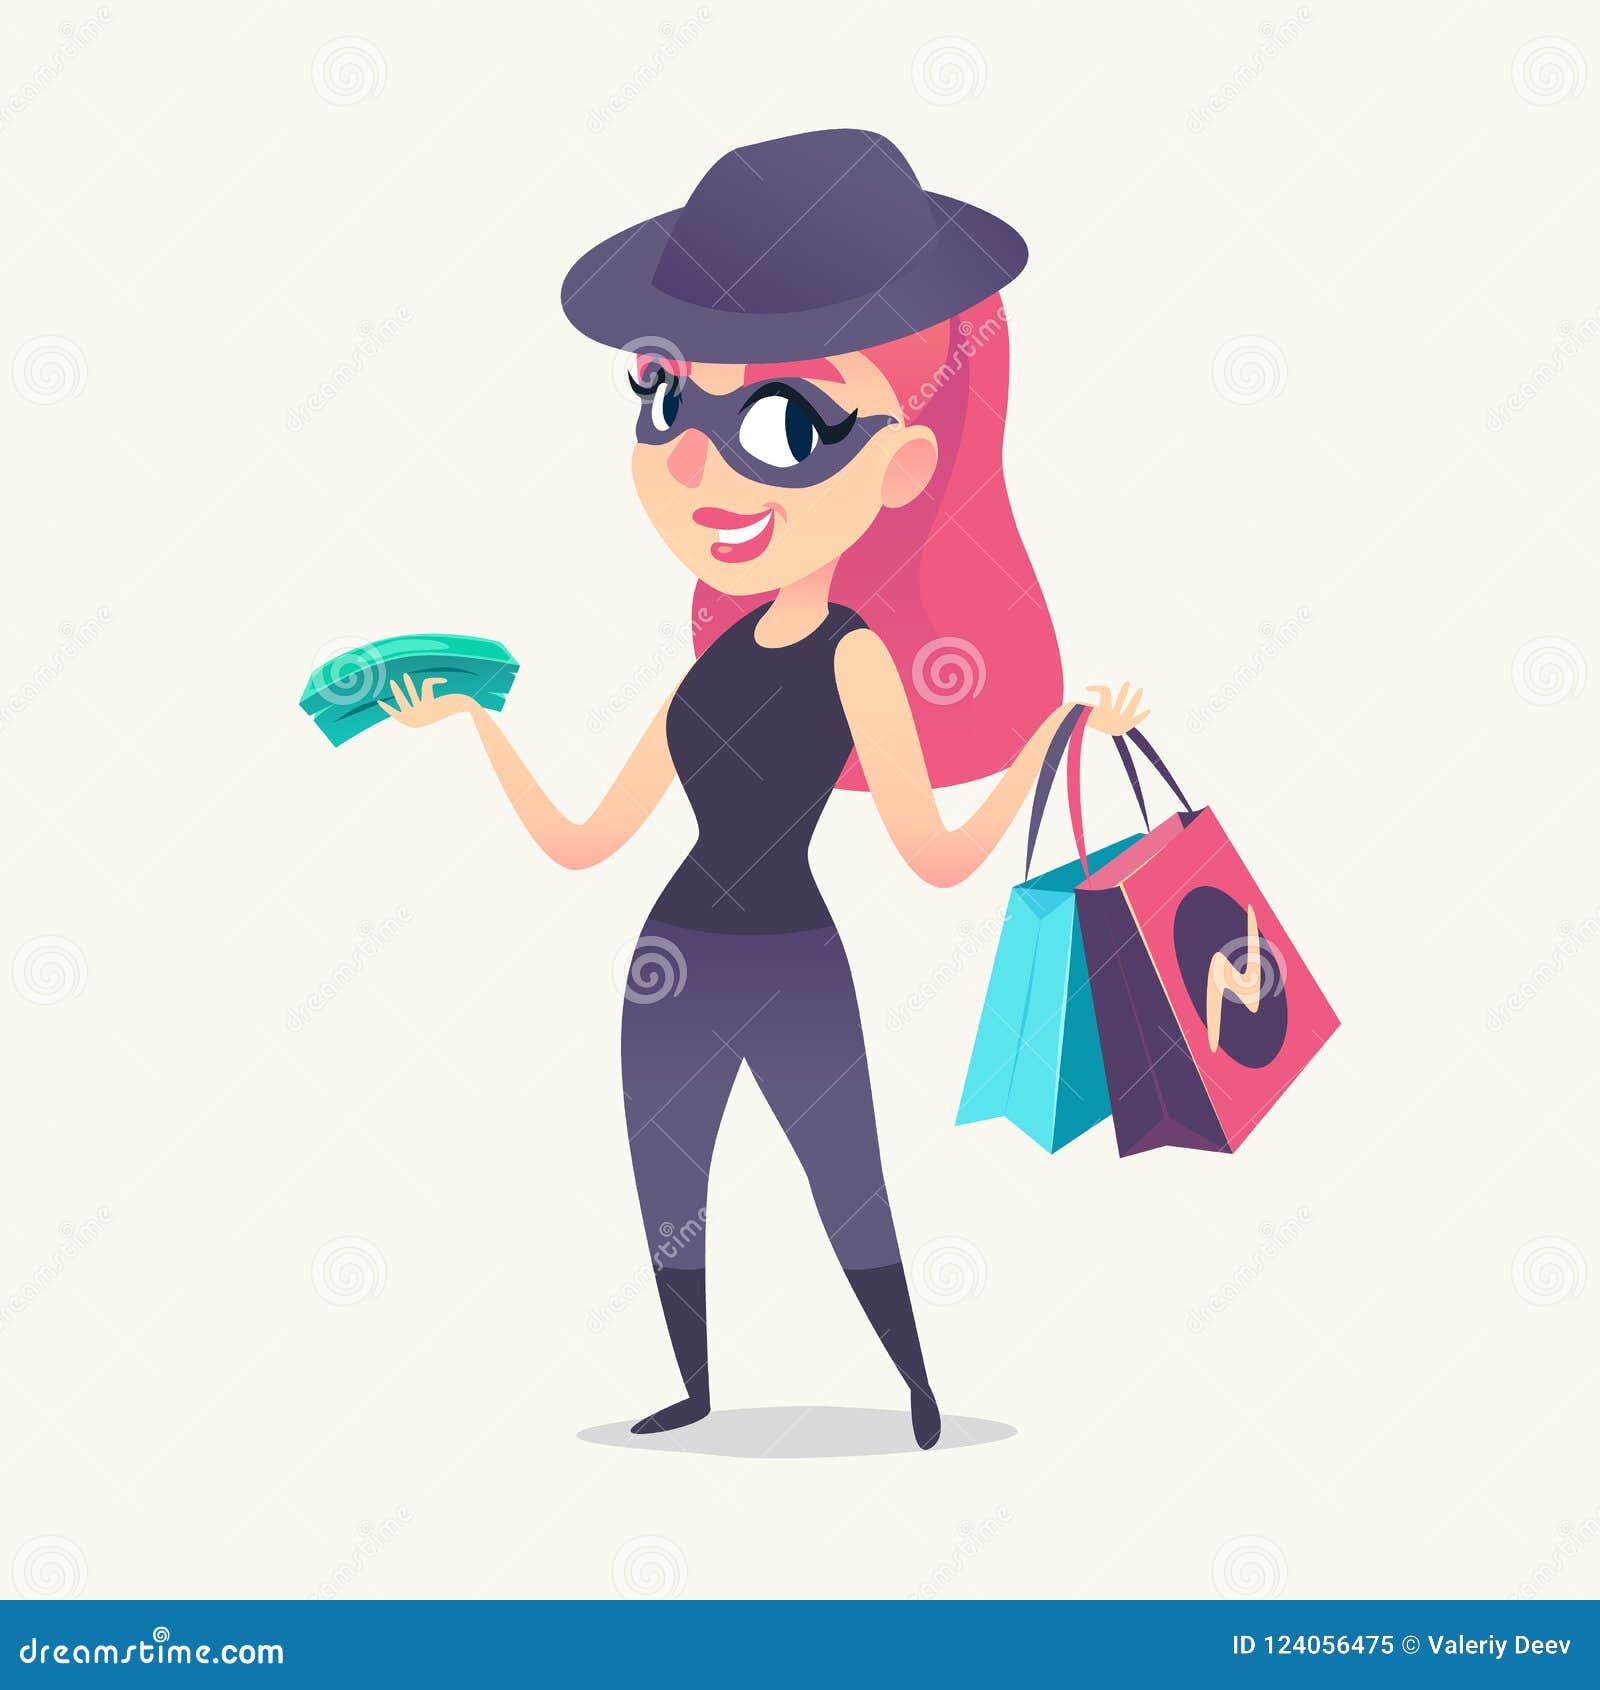 smiling redhead spy female as mystery shopper in mask, black hat and dark suit, with purchases and money in hands.